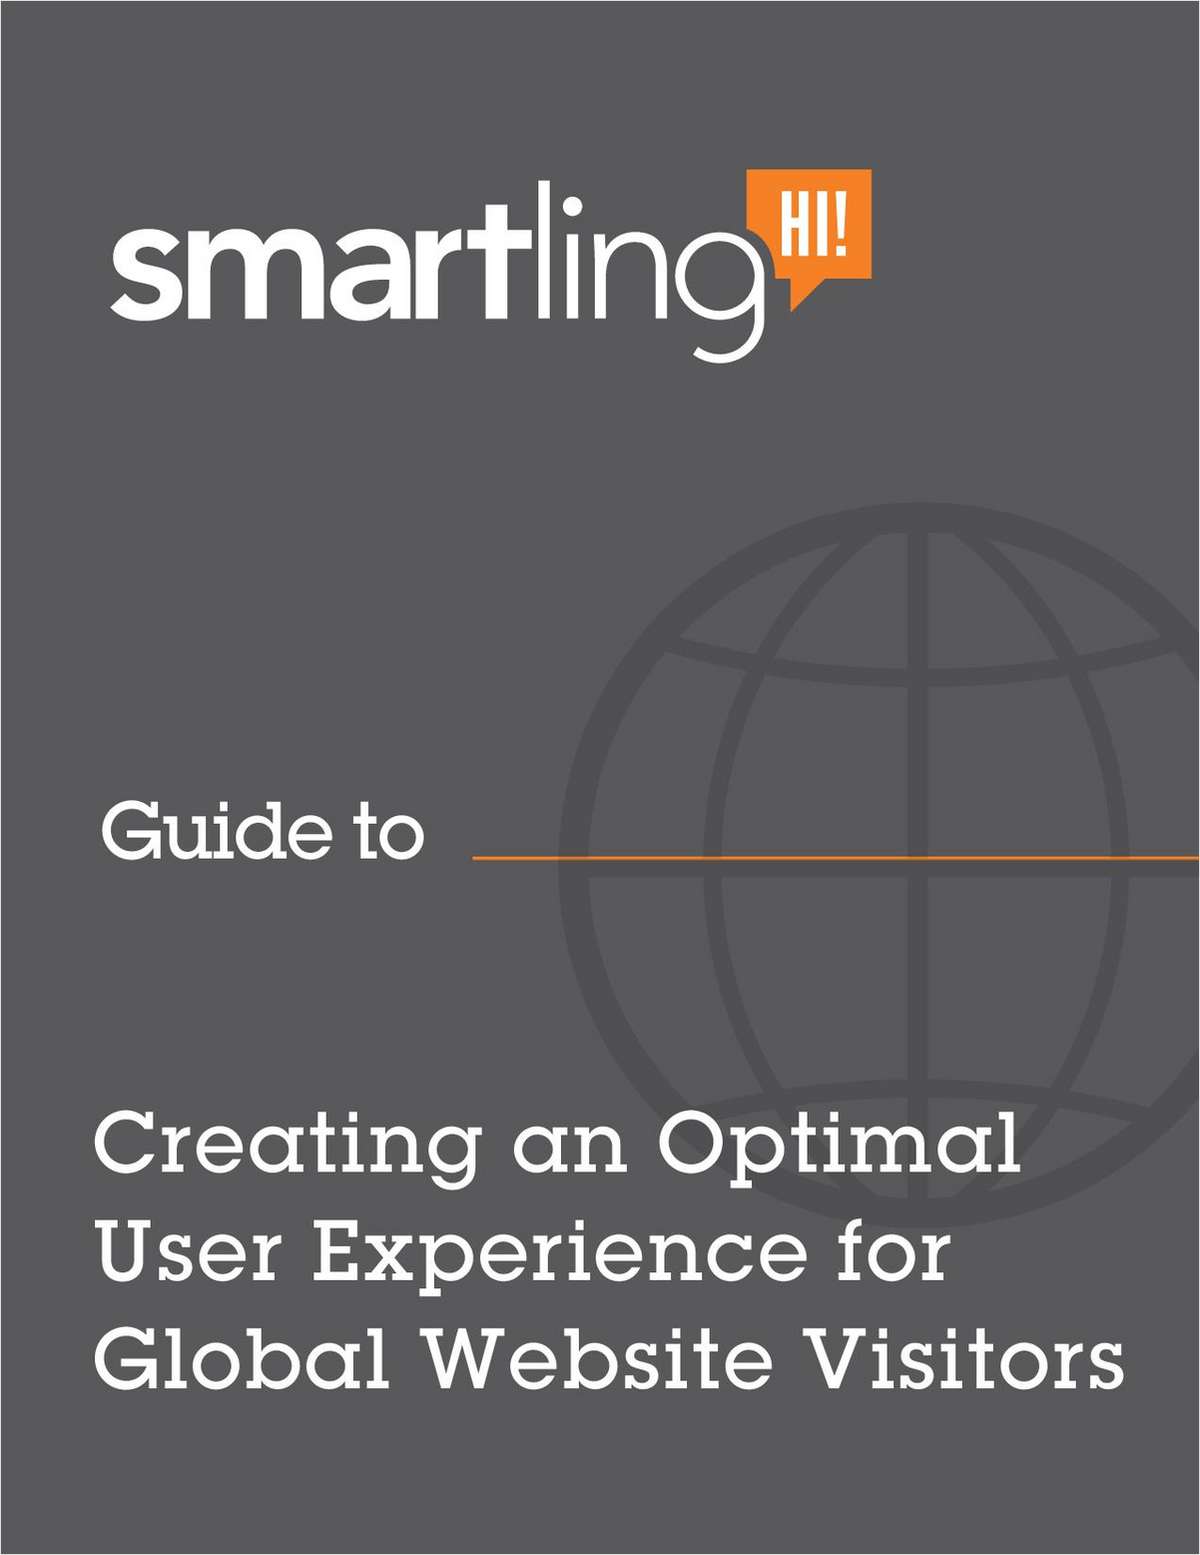 Creating an Optimal User Experience for Global Website Visitors